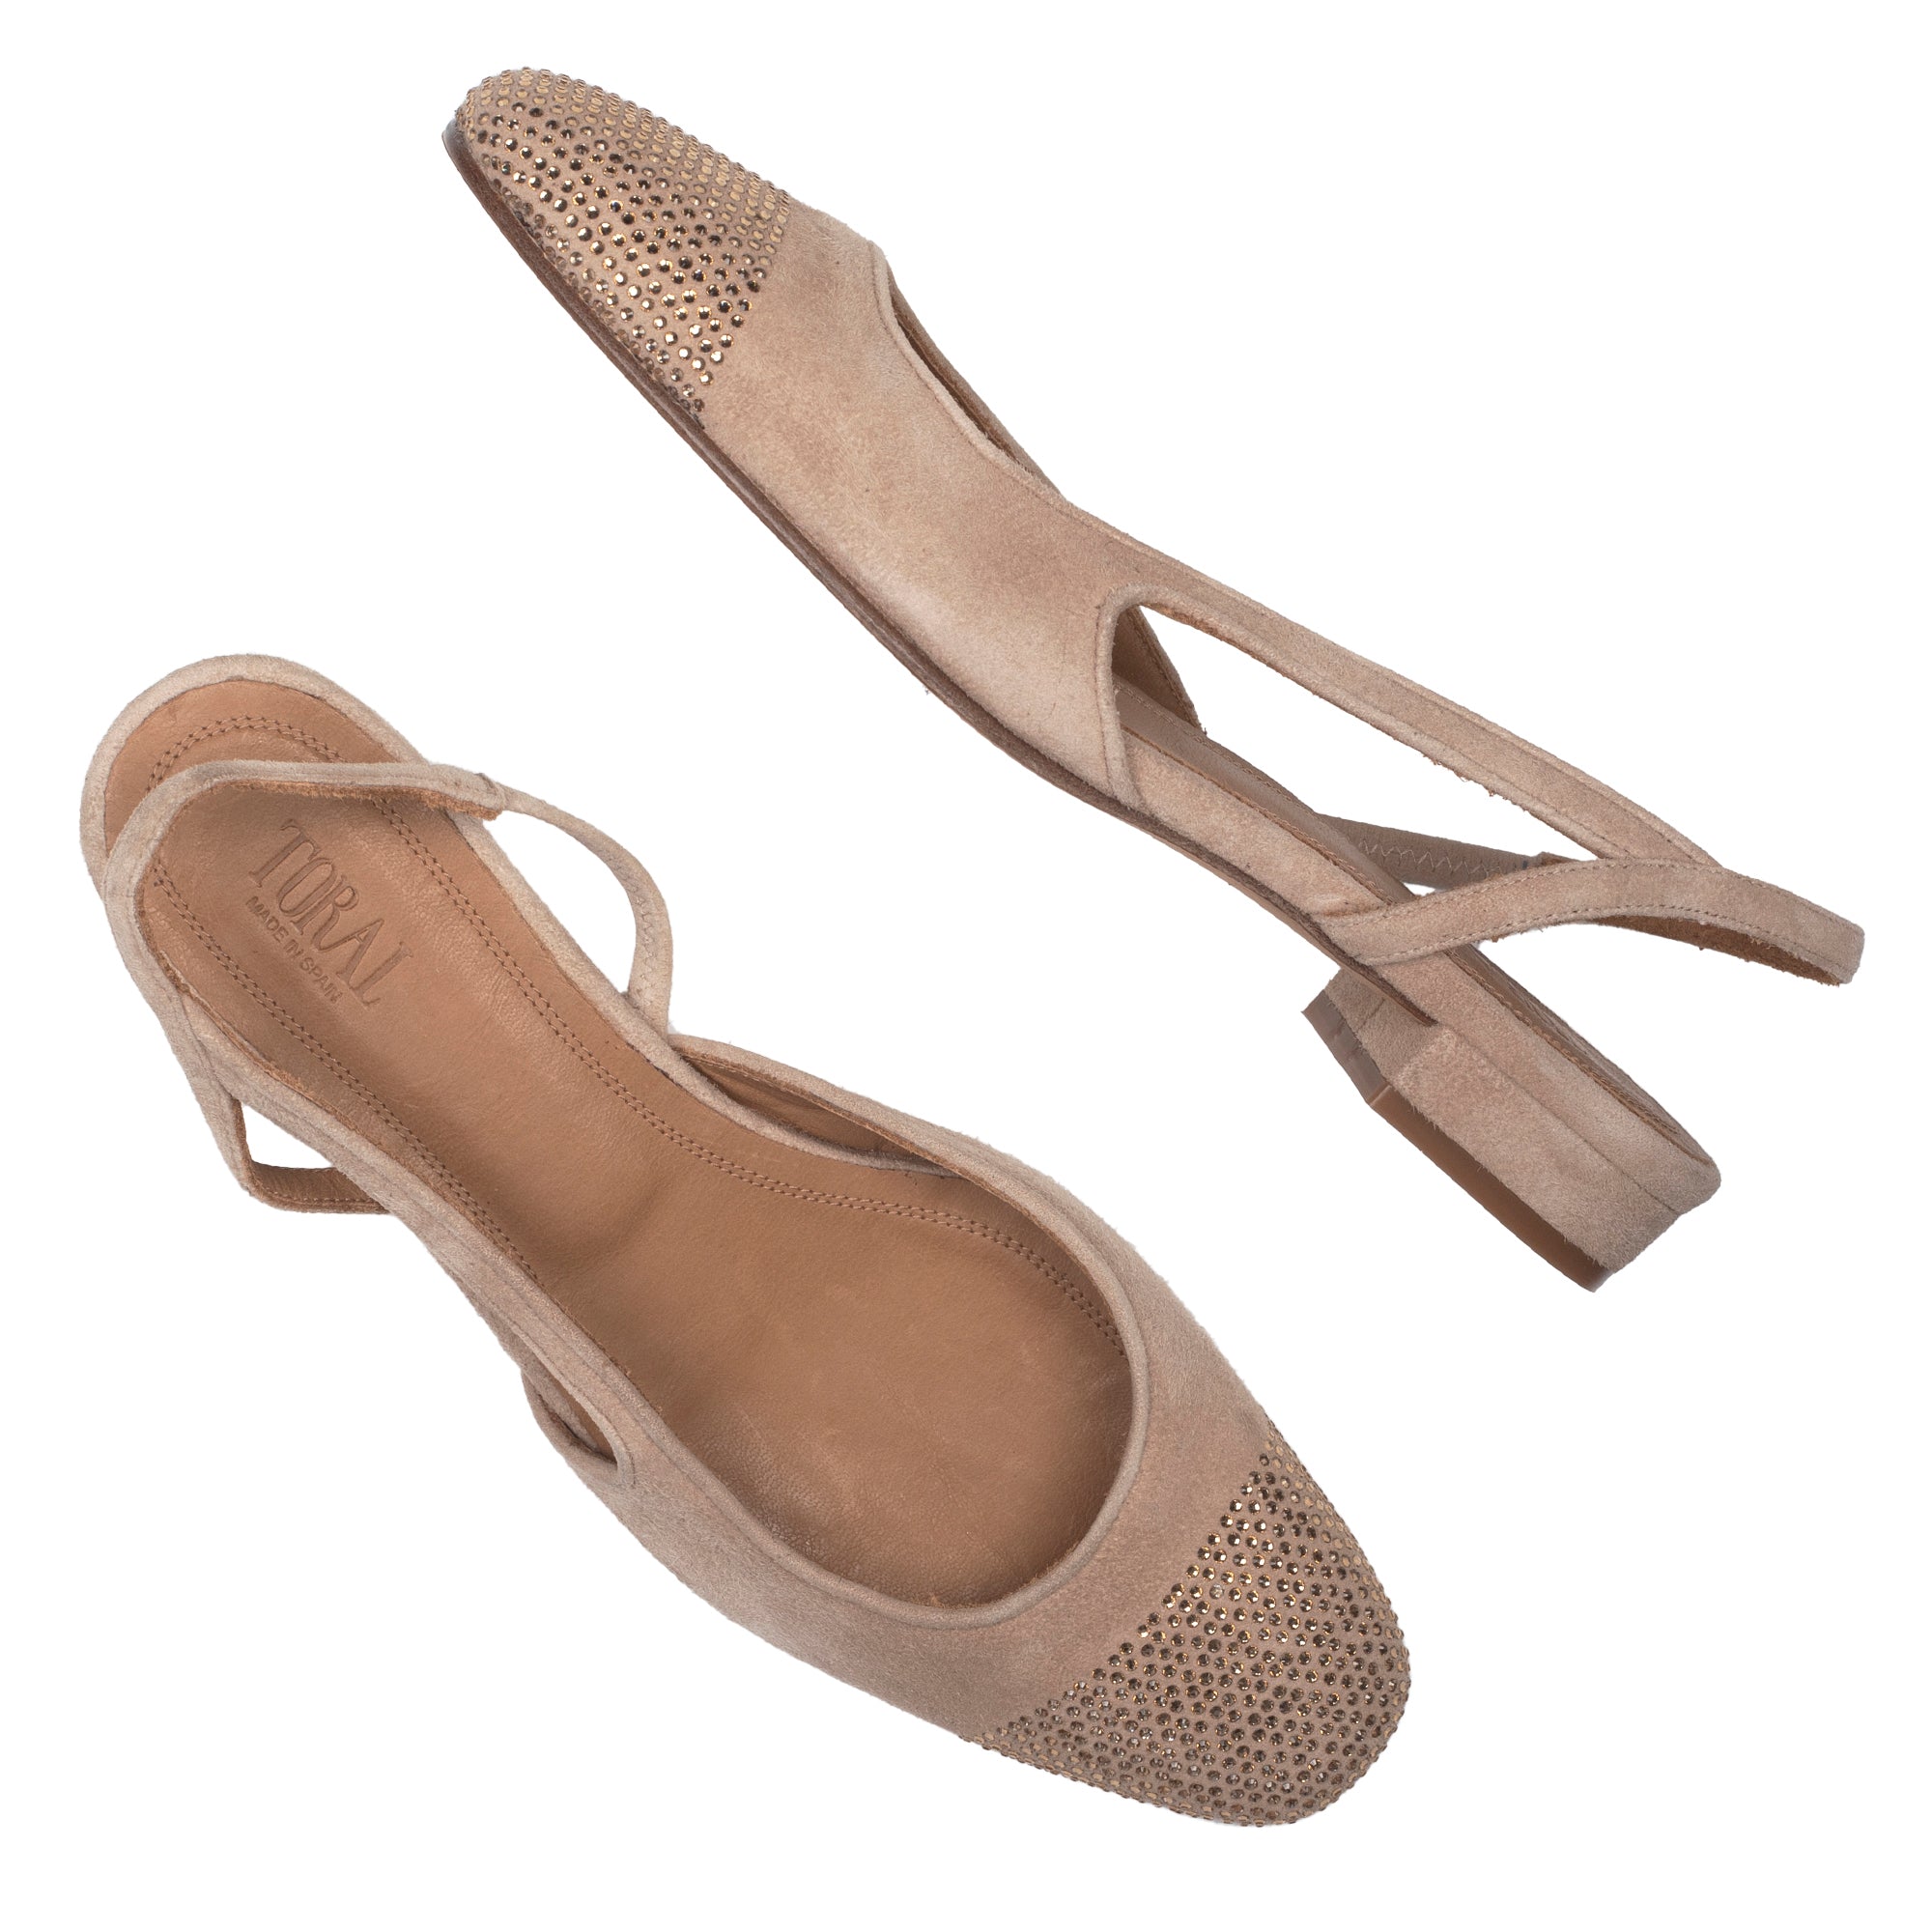 LILA STRASS SAND SUEDE SANDALS